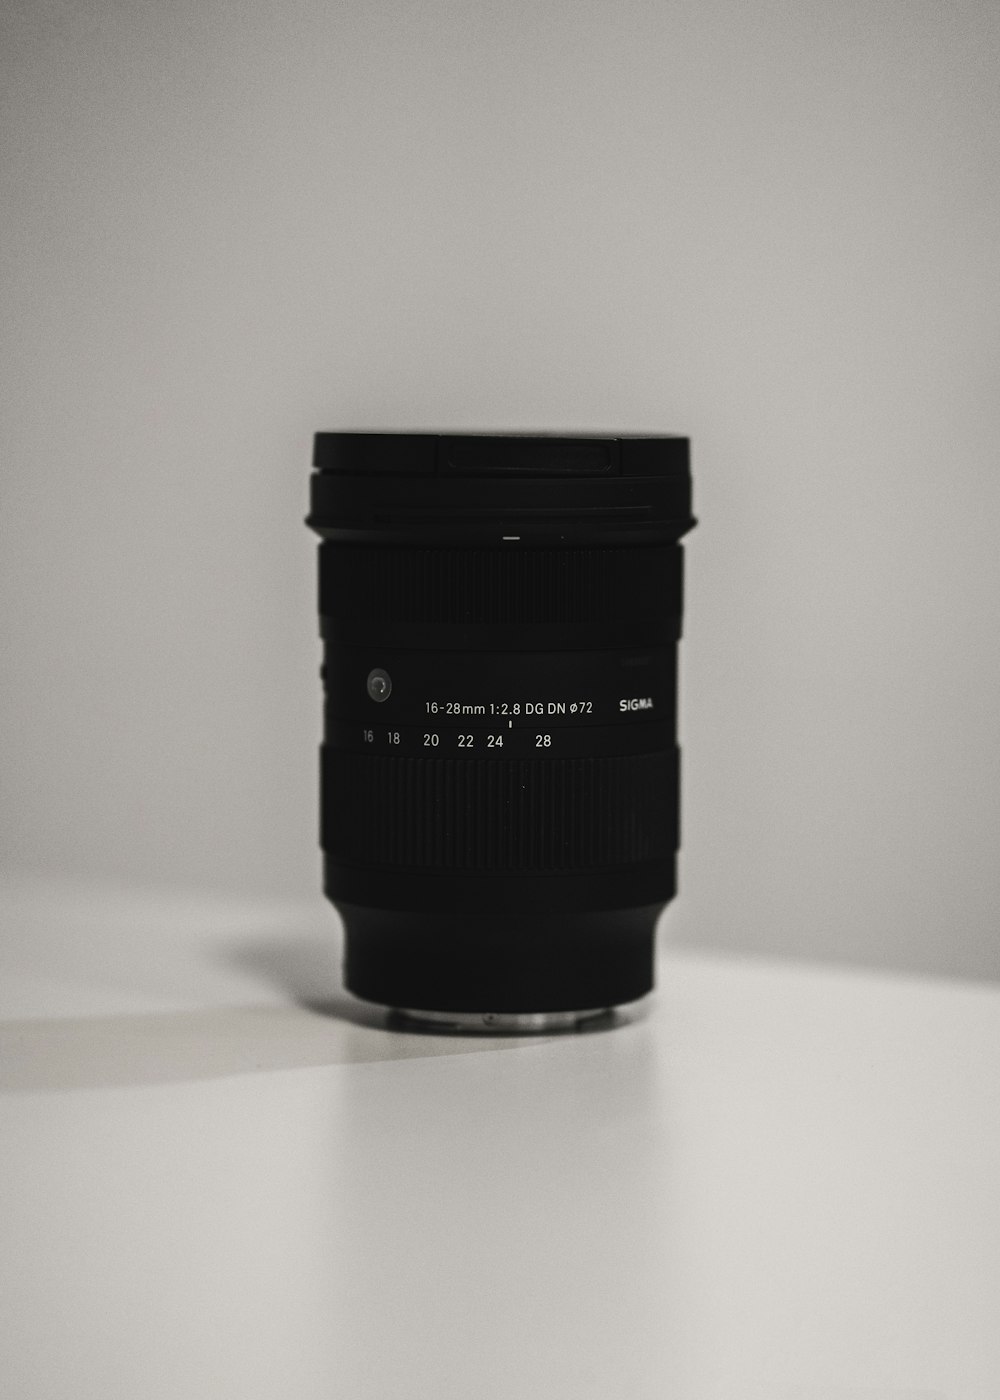 a camera lens sitting on top of a table